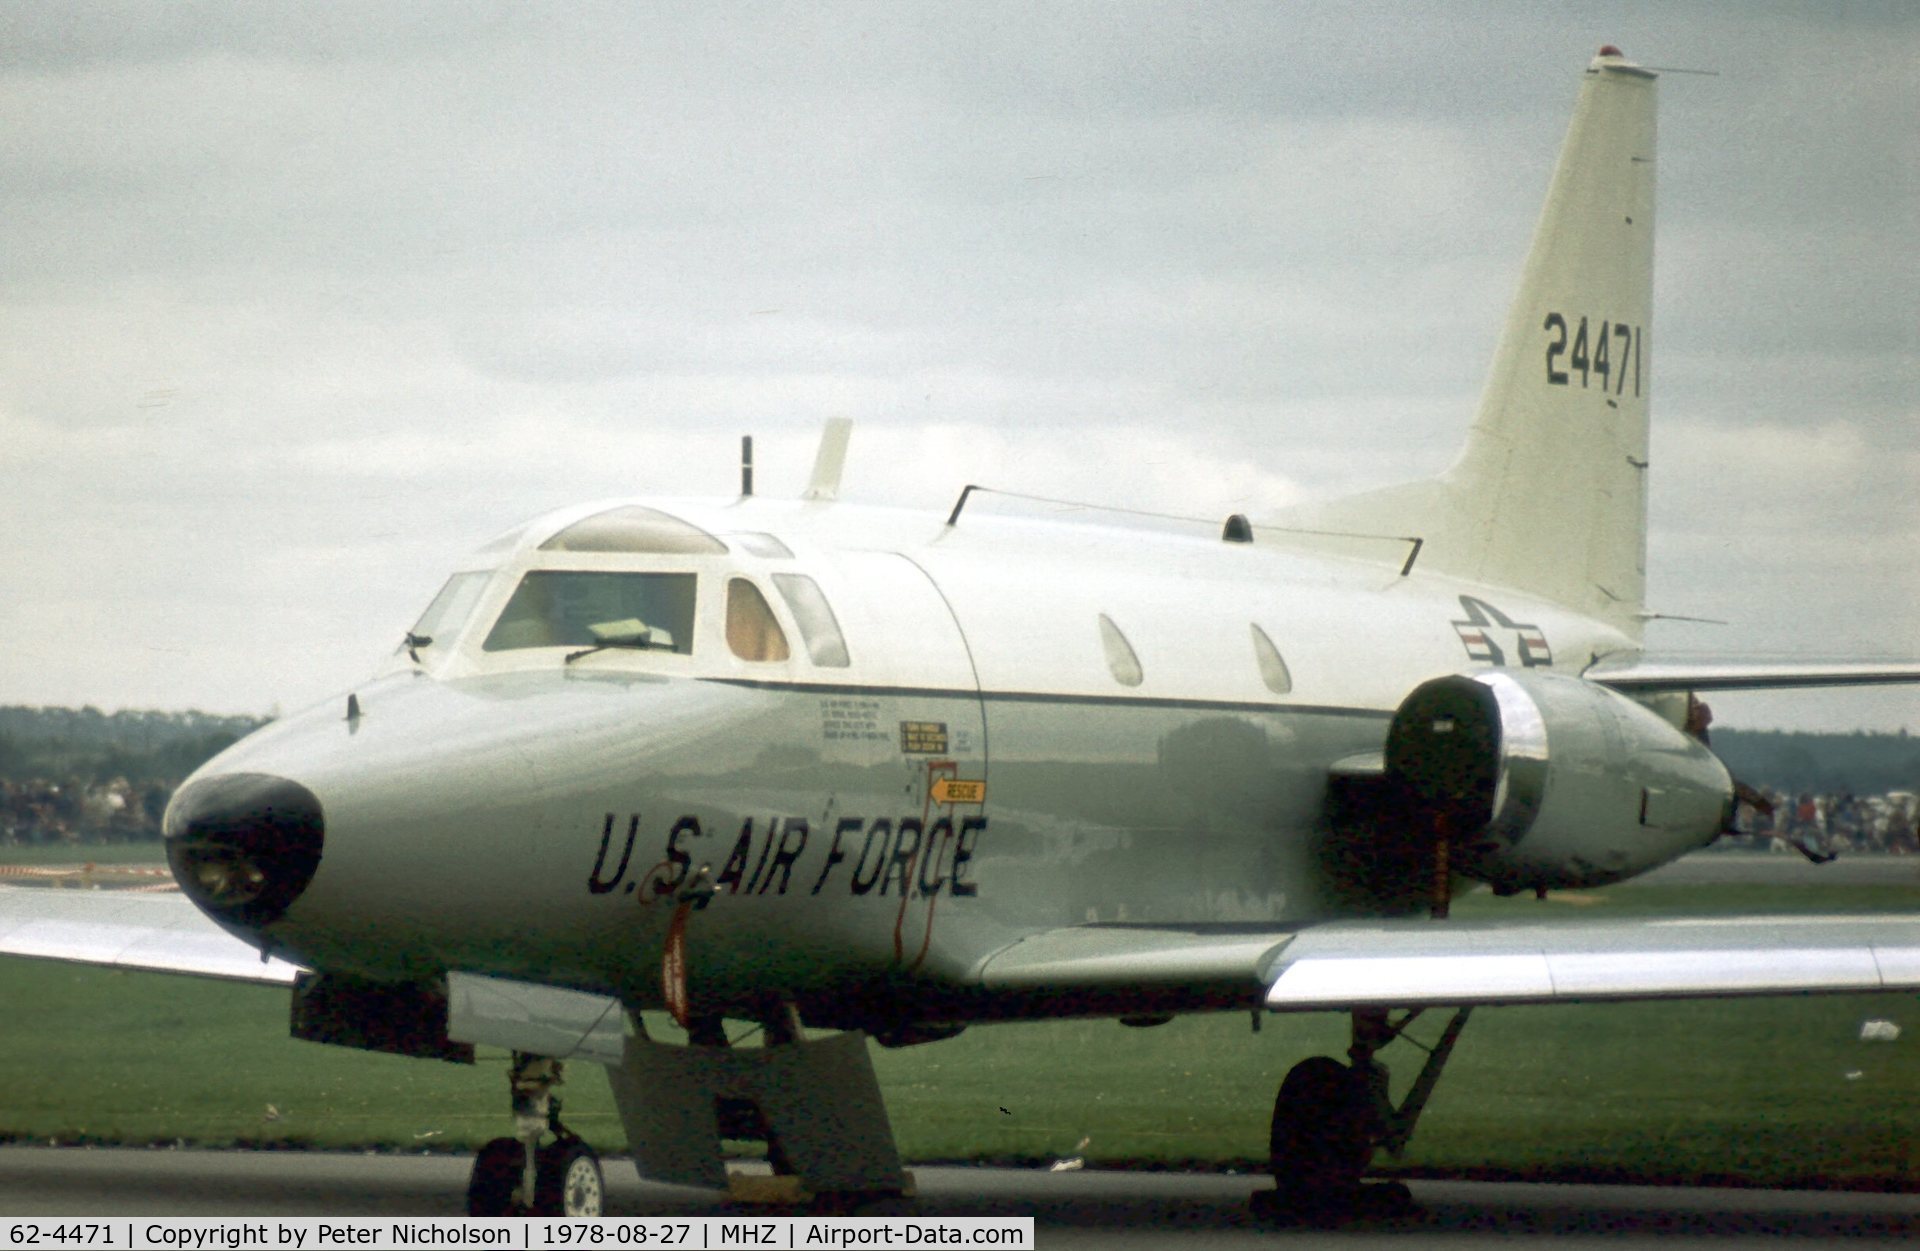 62-4471, 1962 North American CT-39A Sabreliner C/N 276-24, CT-39A Sabreliner of 58th Military Airlift Squadron on display at the 1978 Mildenhall Air Fete.